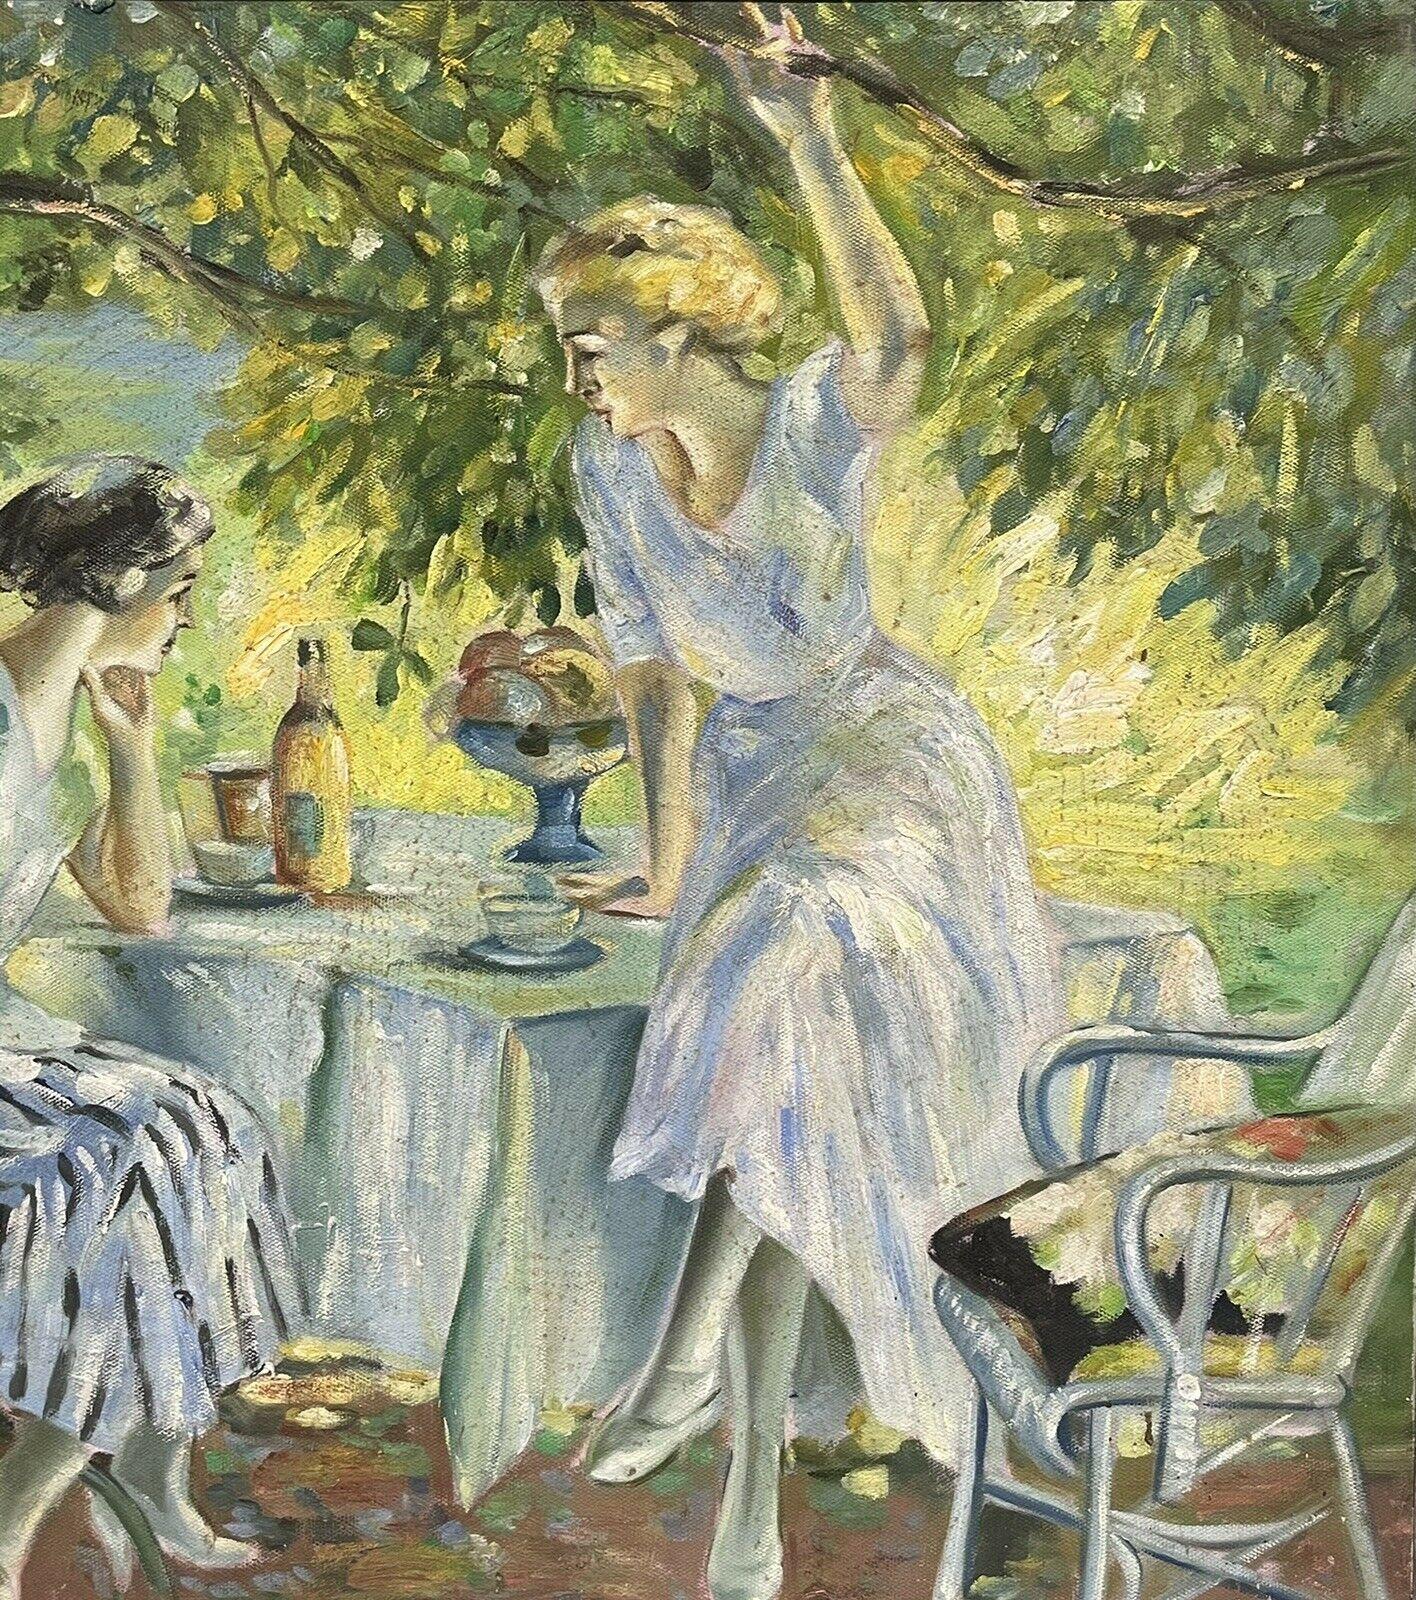 SIGNED FRENCH OIL - ELEGANT ART DECO LADIES ENJOYING PICNIC AT TABLE RIVER BANK - Impressionist Painting by French impressionist